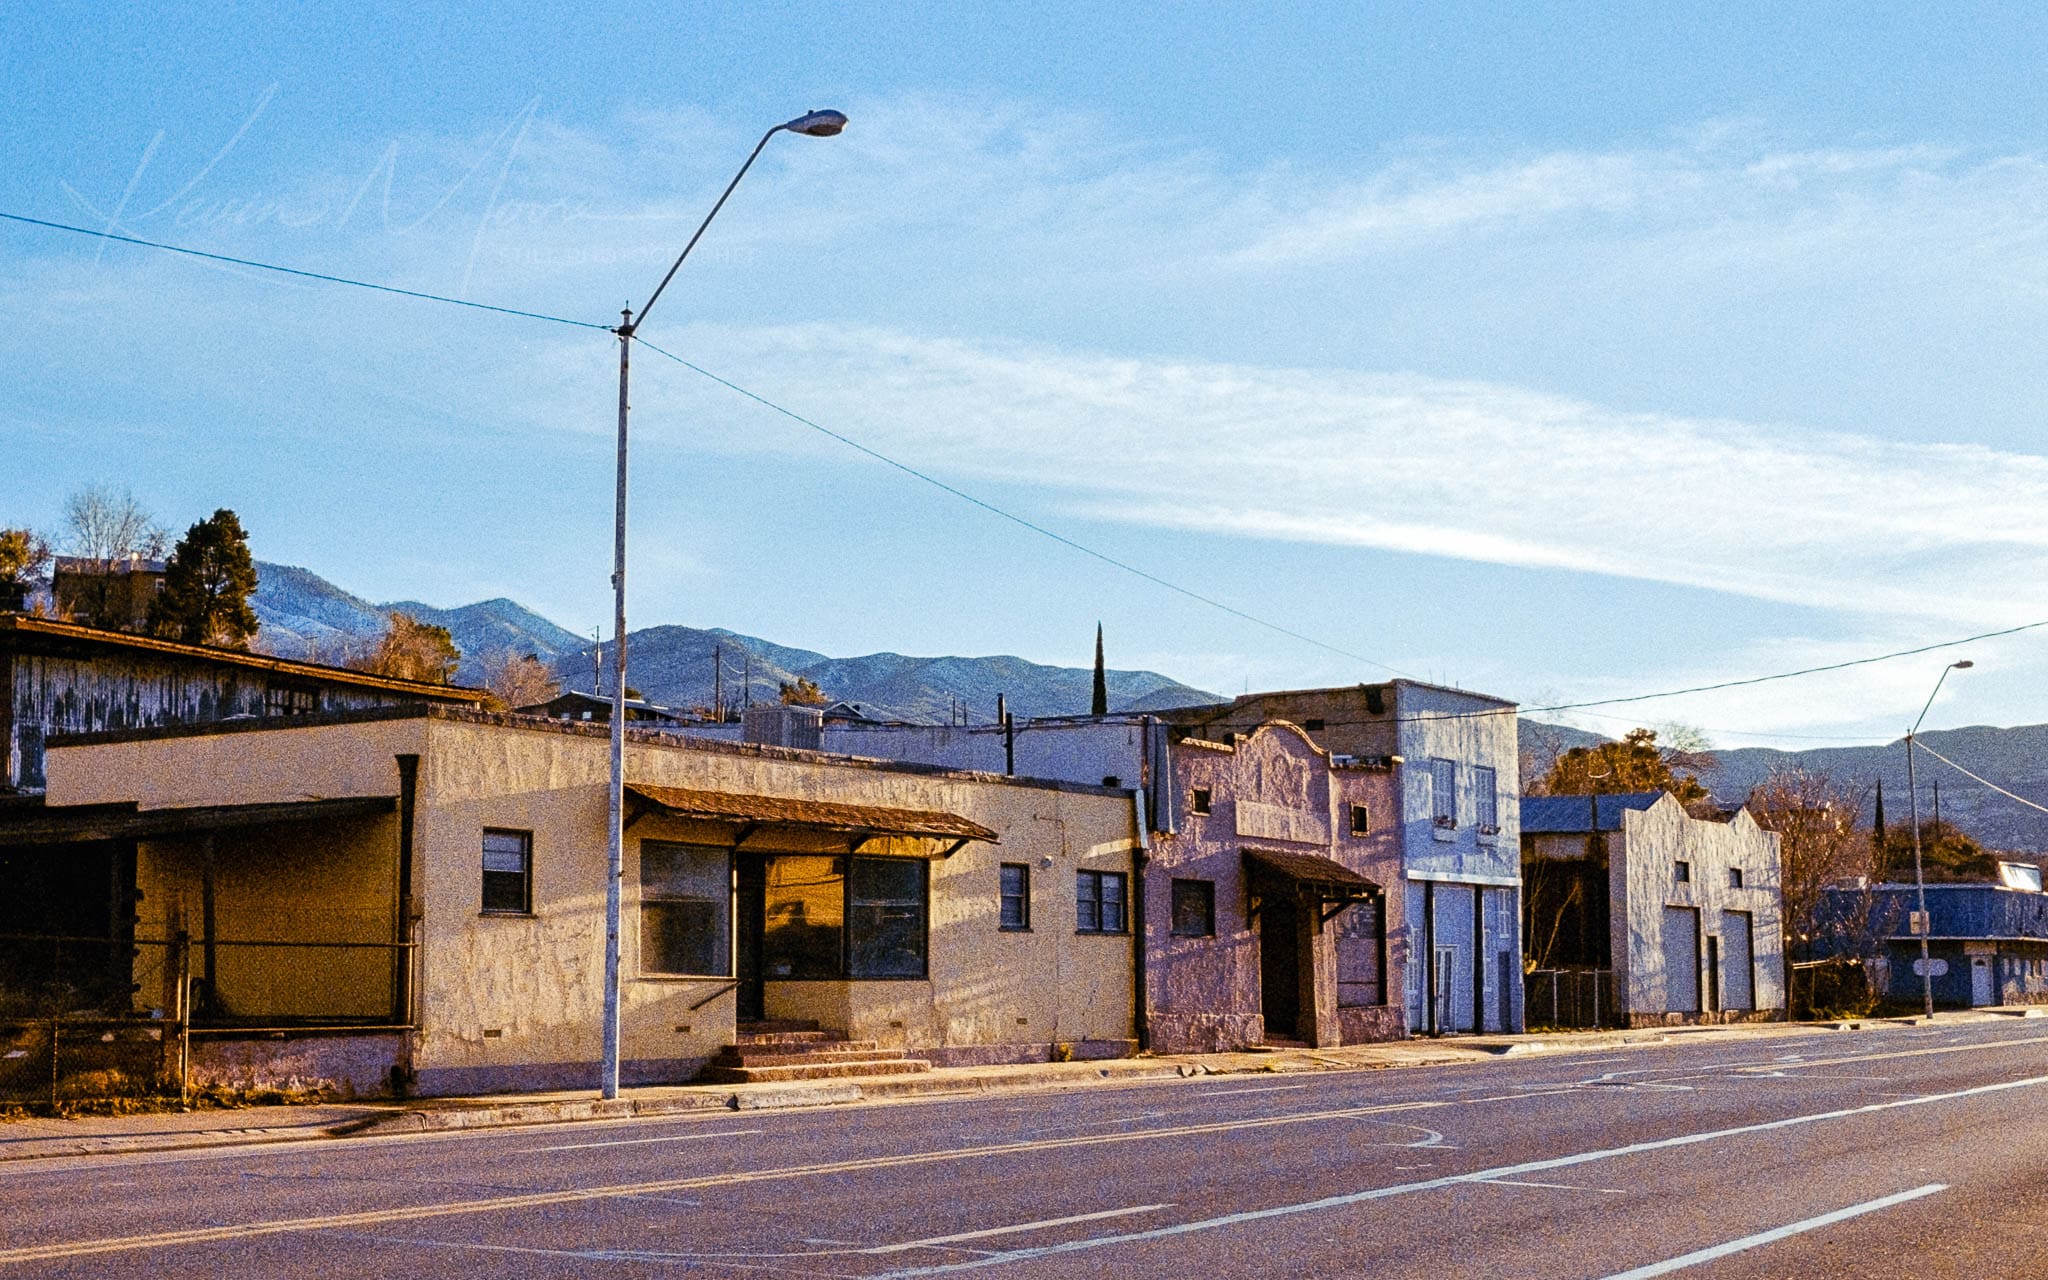 Deserted suburban street scene in a rustic mountain town under clear skies.